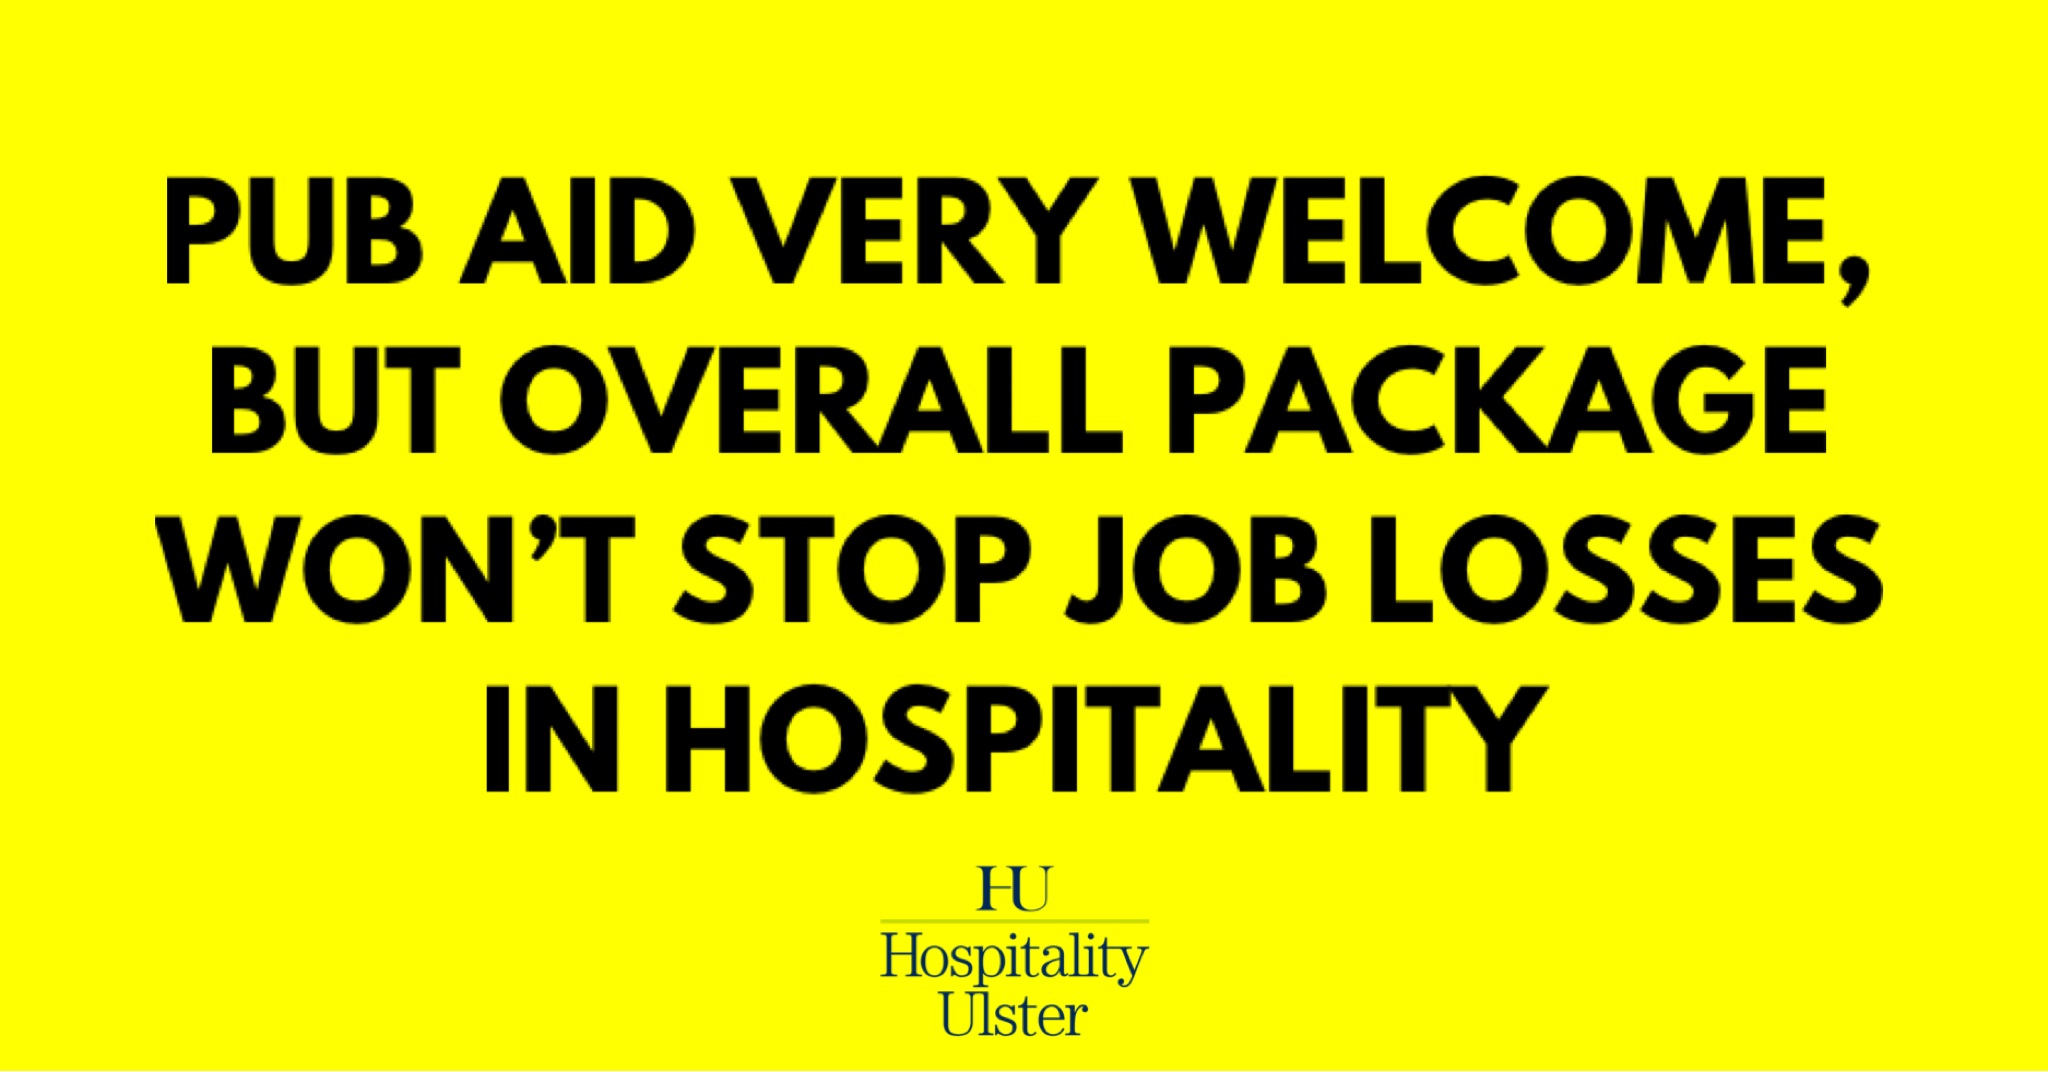 PUB AID VERY WELCOME BUT OVERALL PACKAGE WONT STOP JOB LOSSES IN HOSPITALITY